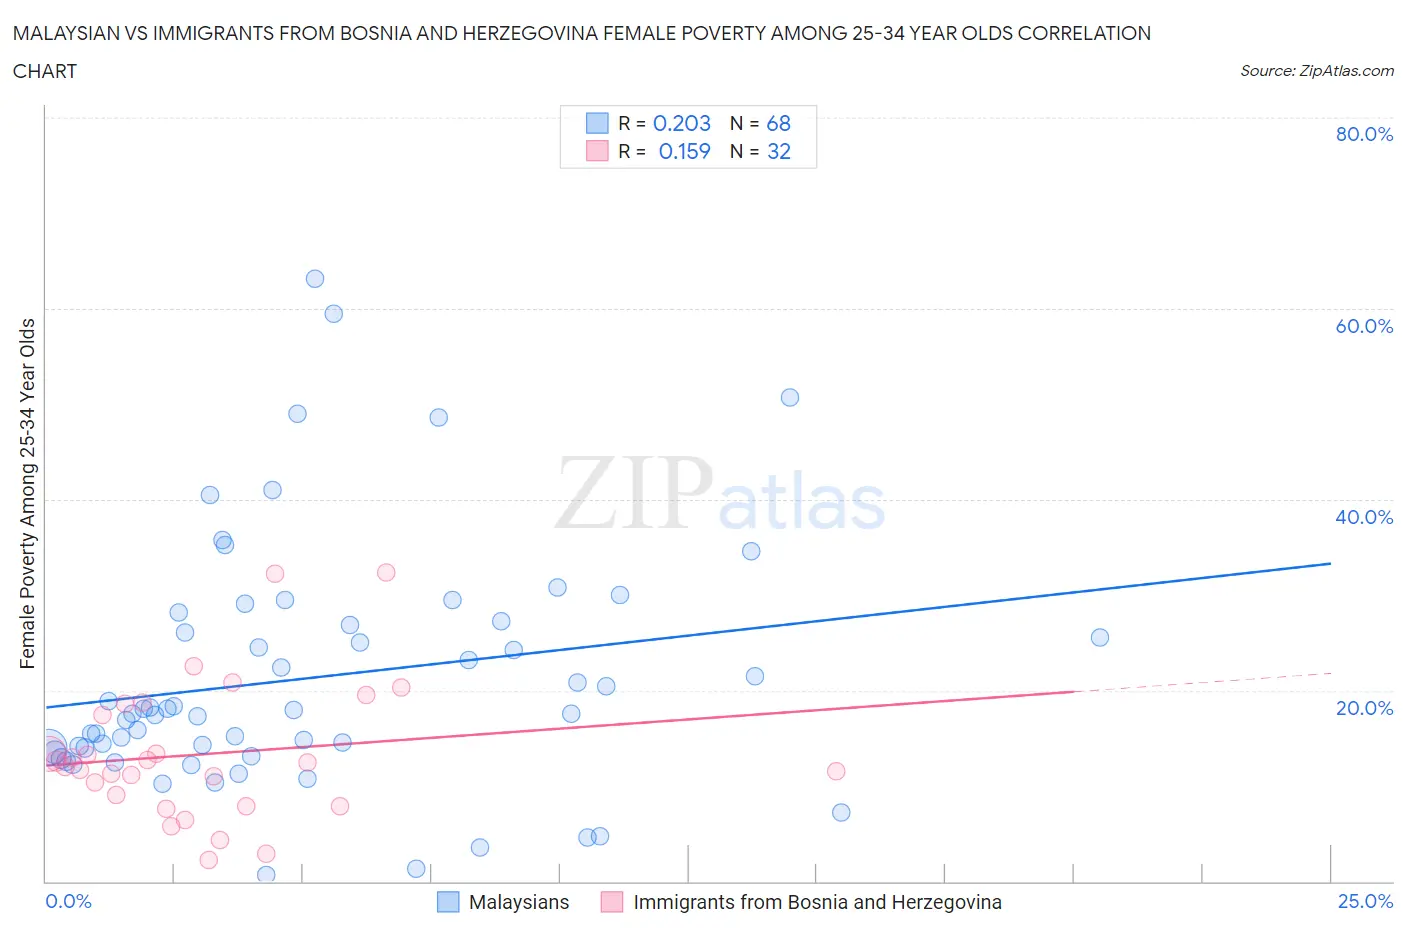 Malaysian vs Immigrants from Bosnia and Herzegovina Female Poverty Among 25-34 Year Olds